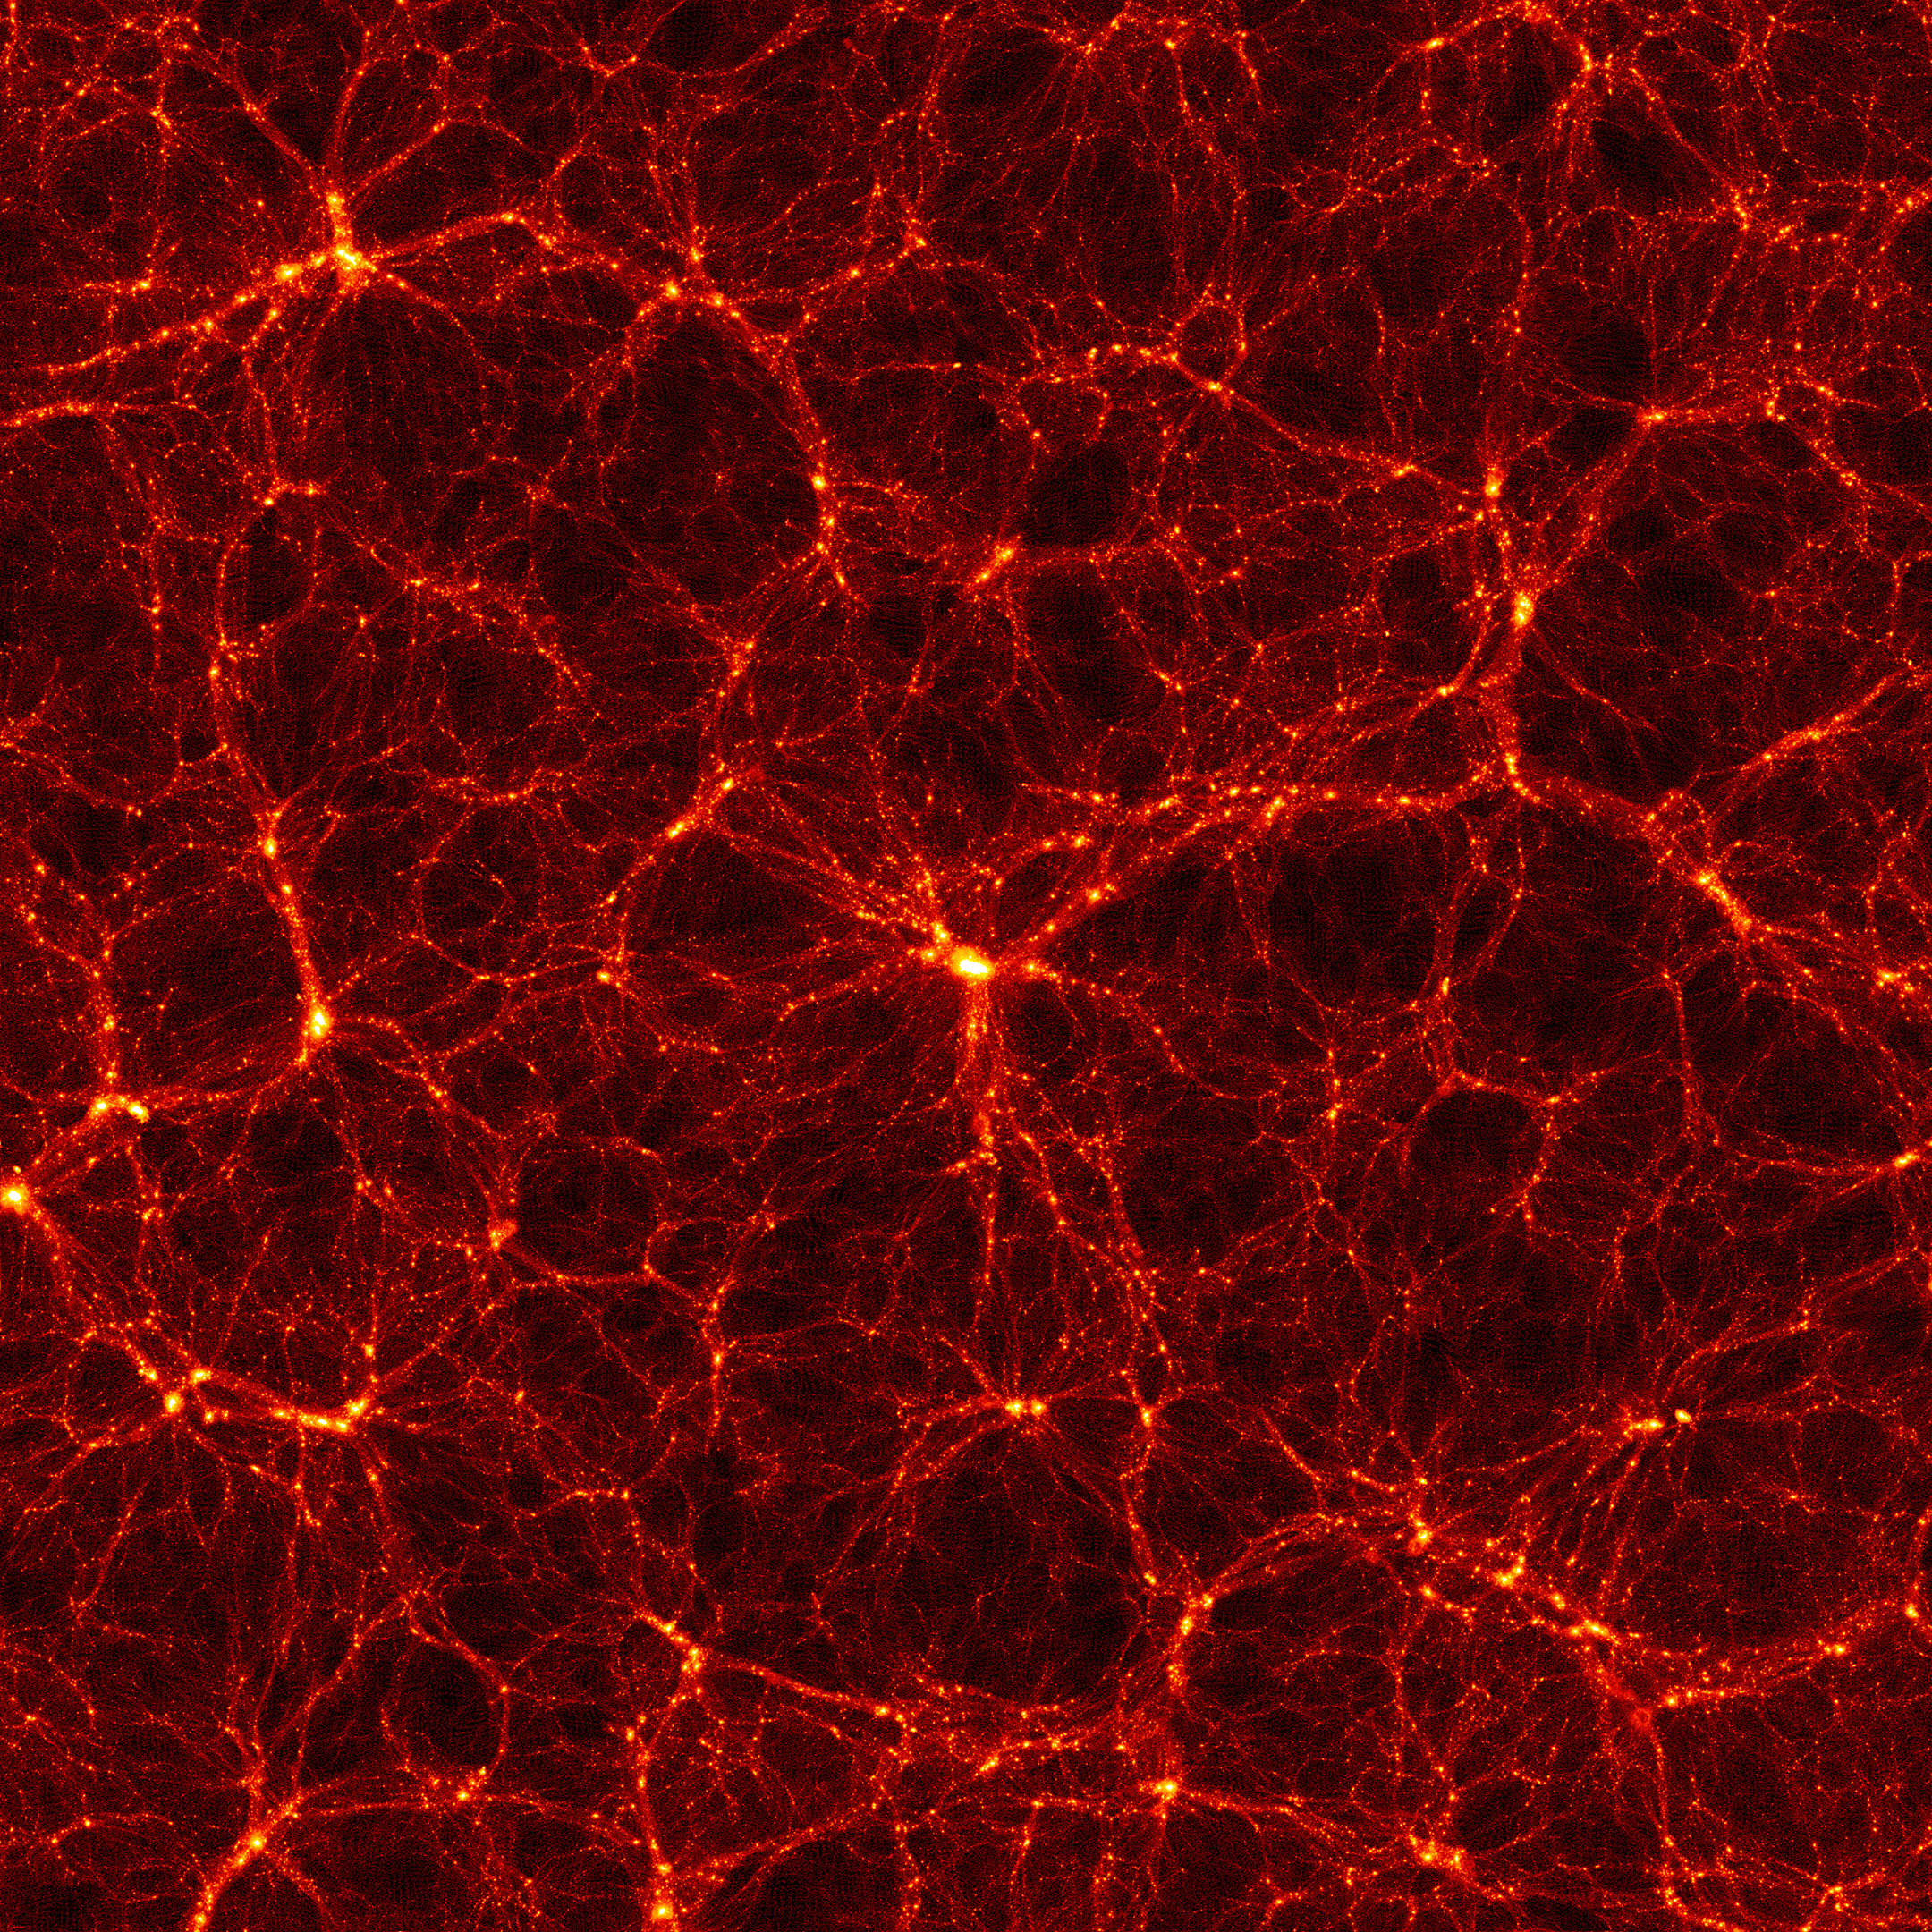 The AbacusSummit suite comprises hundreds of simulations of how gravity shaped the distribution of dark matter throughout the universe. Here, a snapshot of one of the simulations is shown at a zoom scale of 1.2 billion light-years across. The simulation replicates the large-scale structures of our universe, such as the cosmic web and colossal clusters of galaxies.